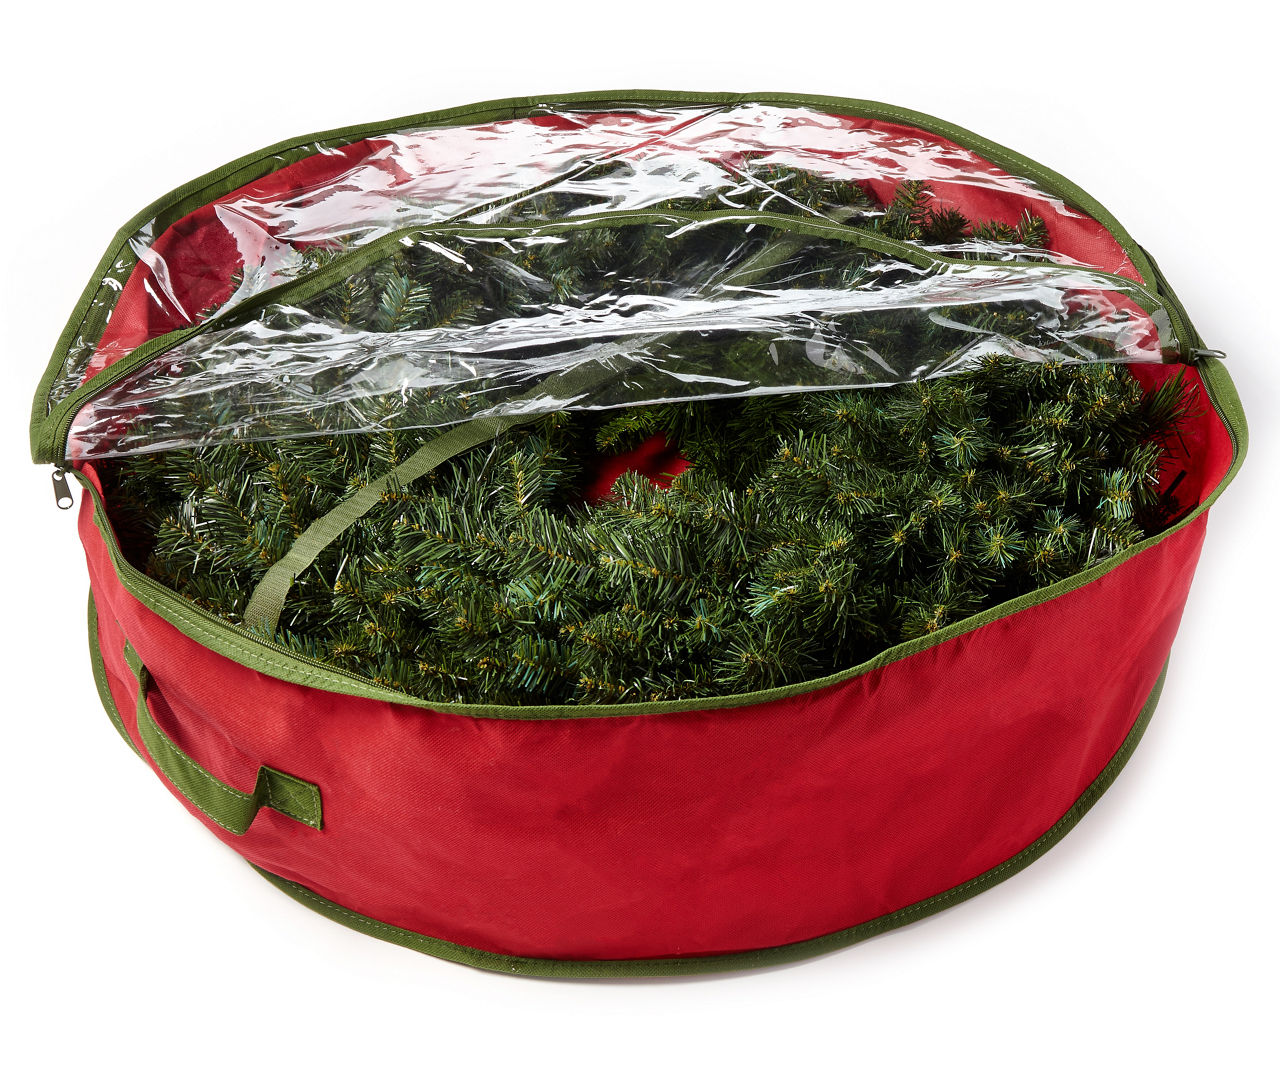 Wreath Storage Bag Clear Christmas Wreath Storage Container,Christmas  Wreath Storage Bag - Clear PVC Plastic for All View Durable Plastic Fabric  Bag for Holiday Artificial Christmas Wreaths 